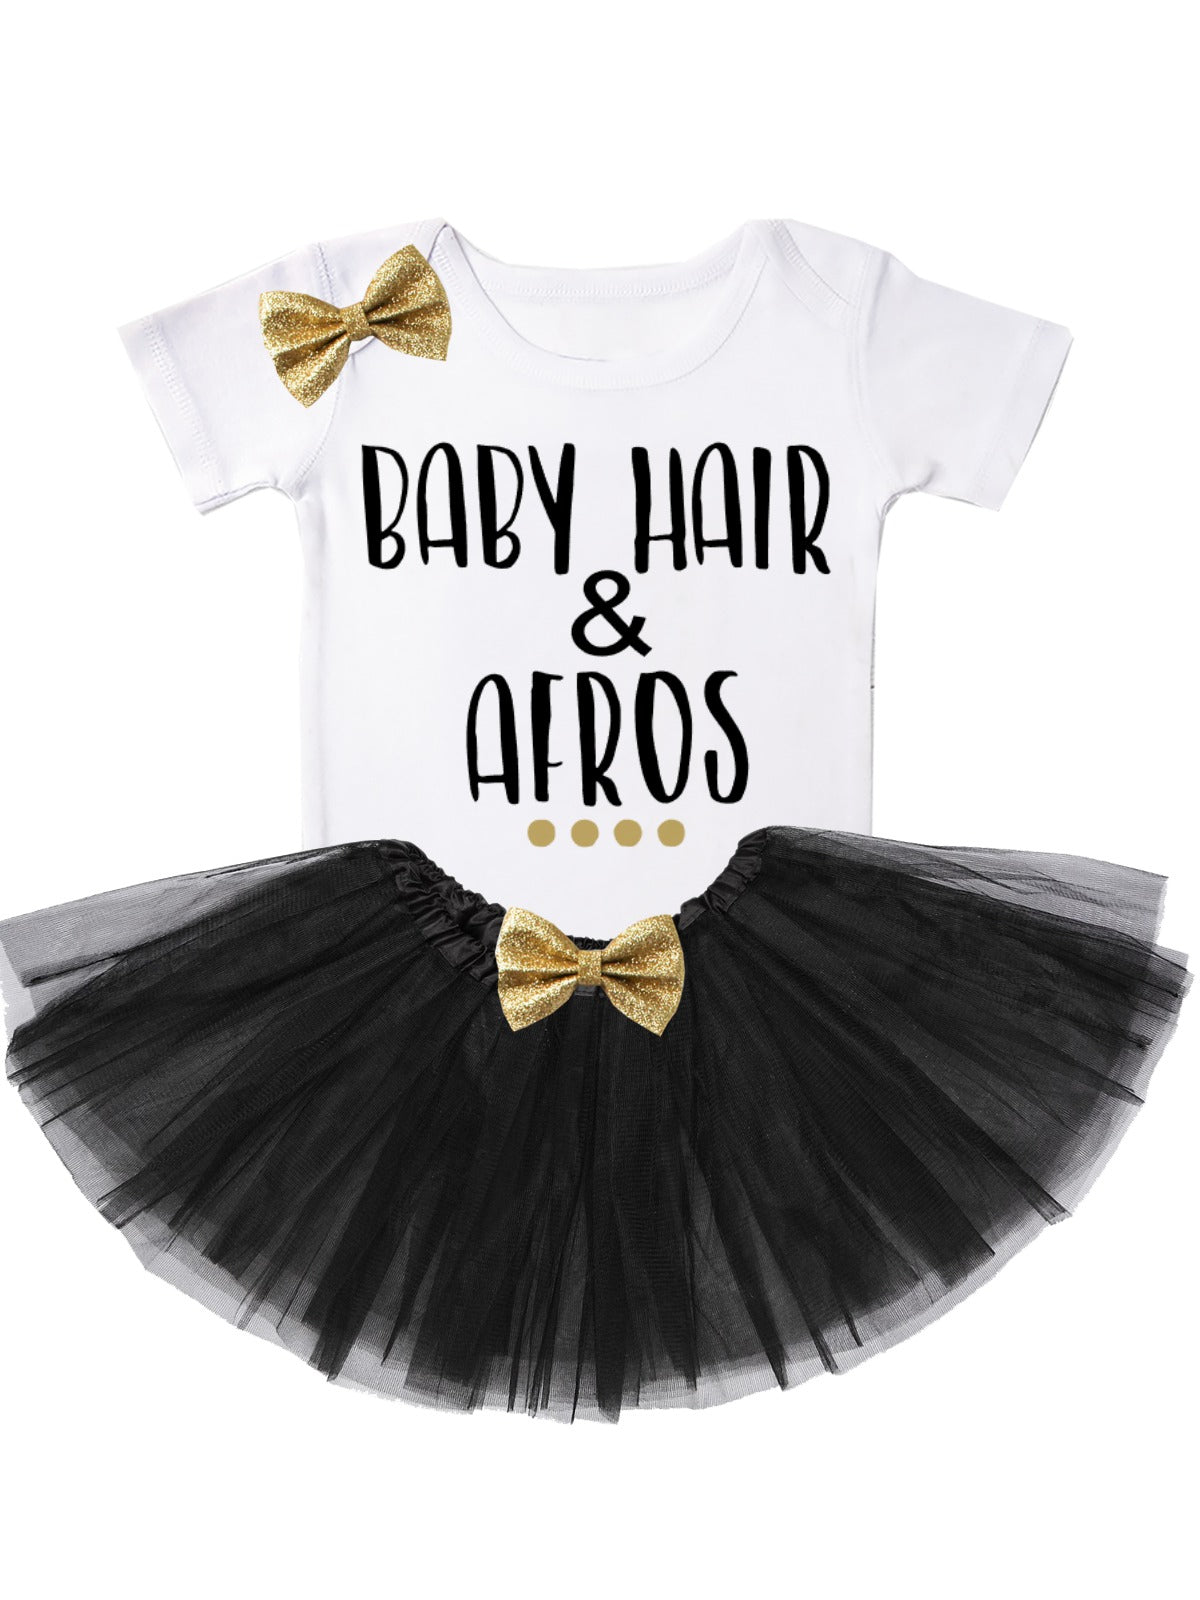 baby hair and afros tutu outfit in black and gold